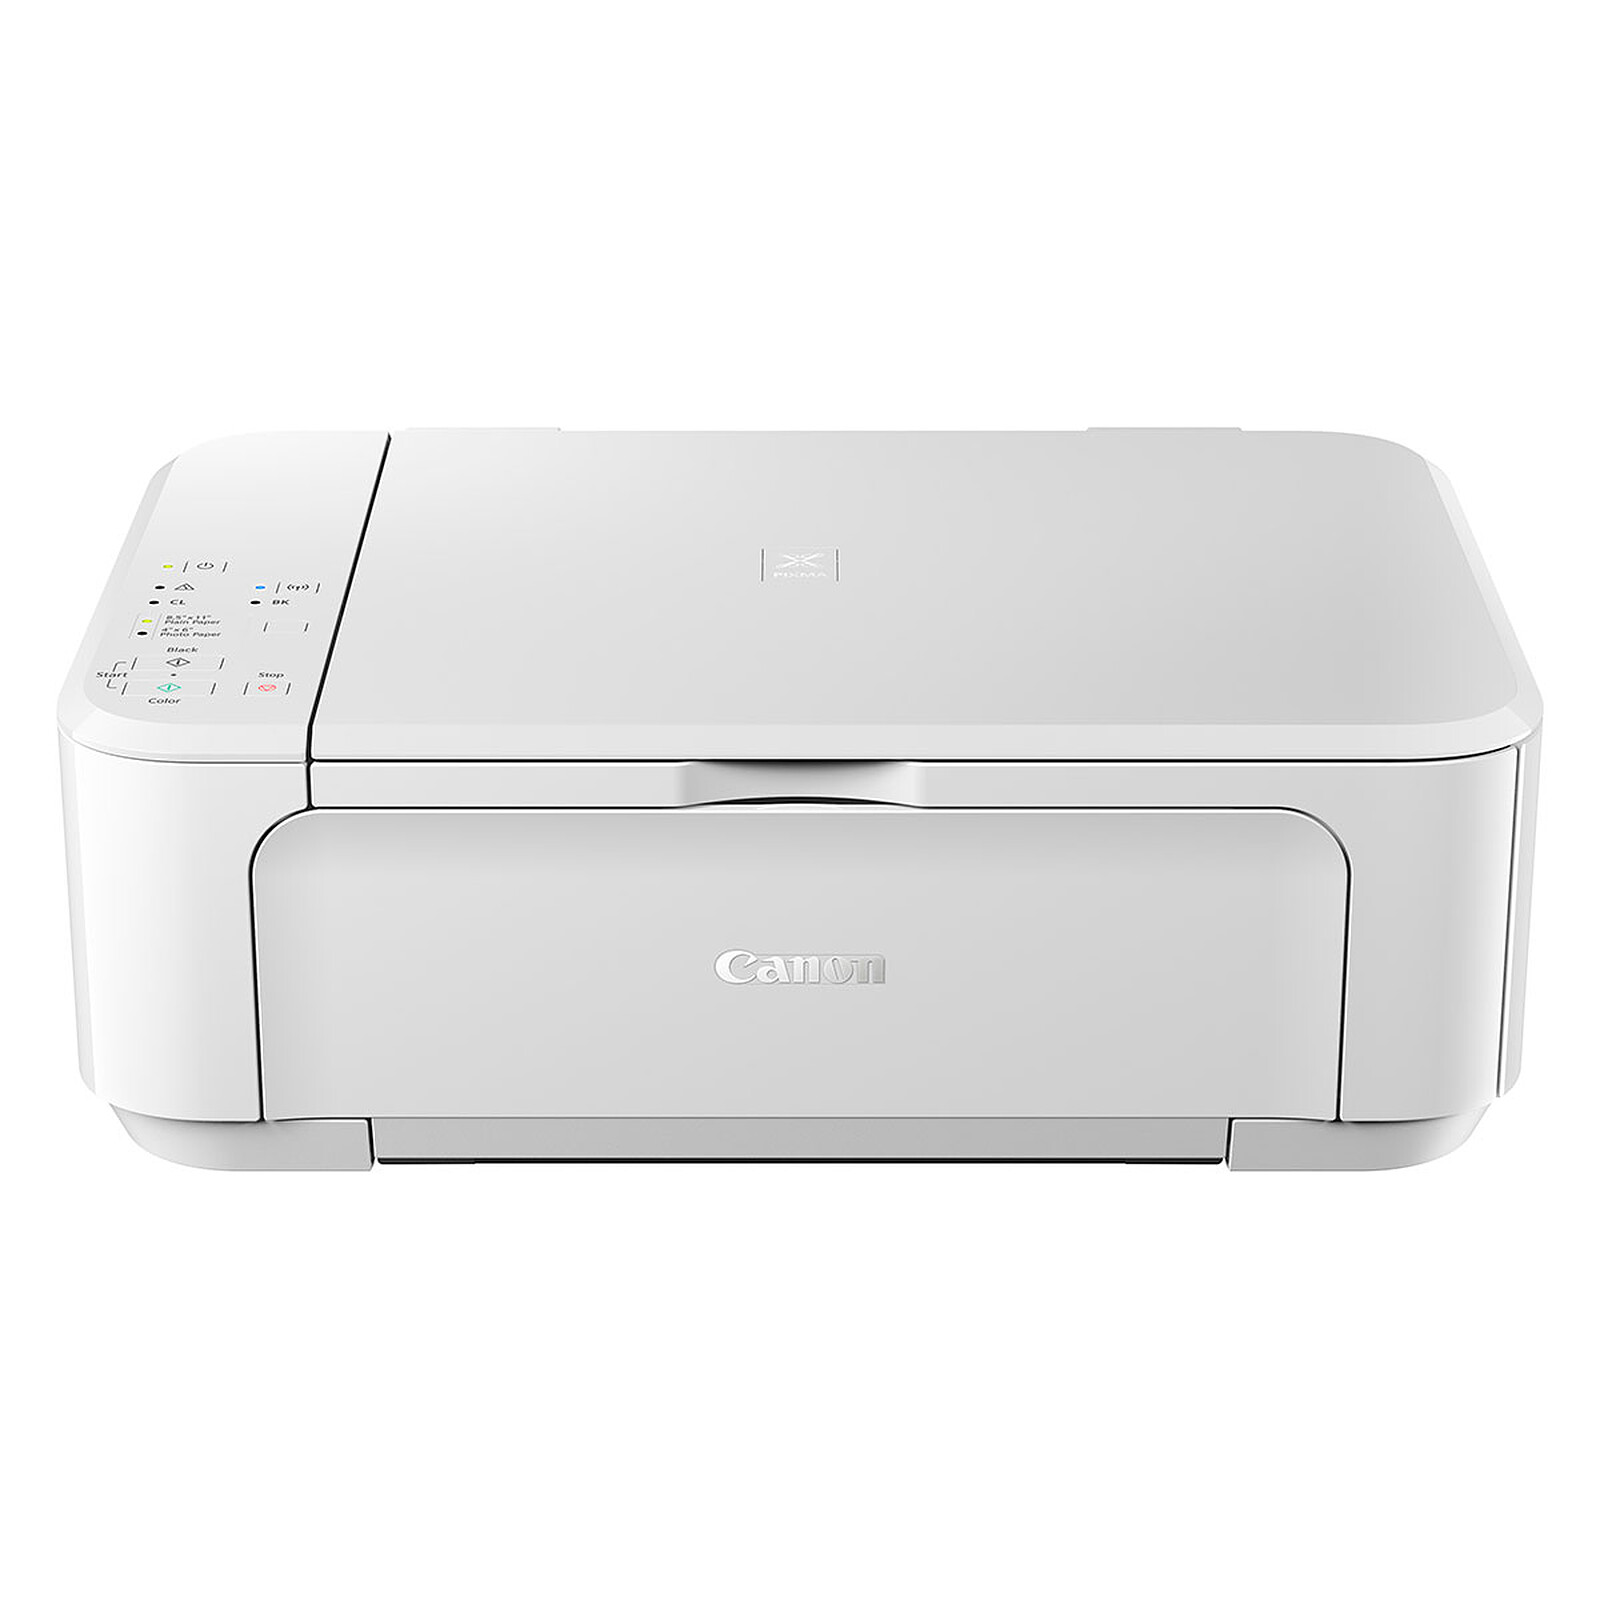 Canon PIXMA MG3650S Series – Connecting the printer to a Windows PC 